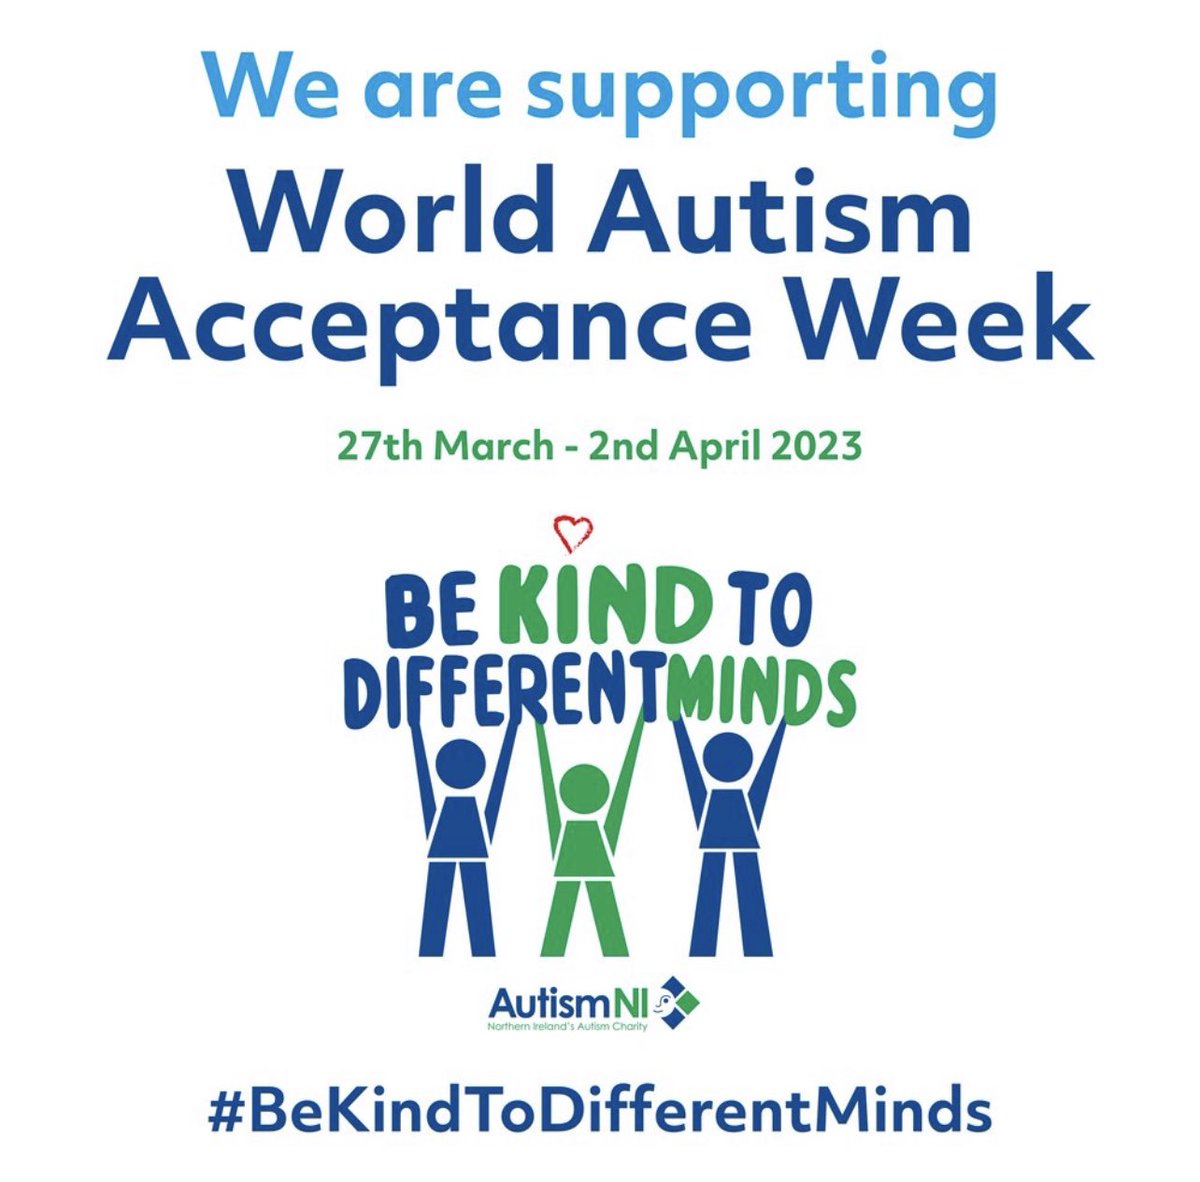 As a learning community, all @StBridesPS1  are committed to ongoing growth & development as we strive to educate all to #BeKindToDifferentMinds 💙🤍💛 #WorldAutismAcceptanceWeek